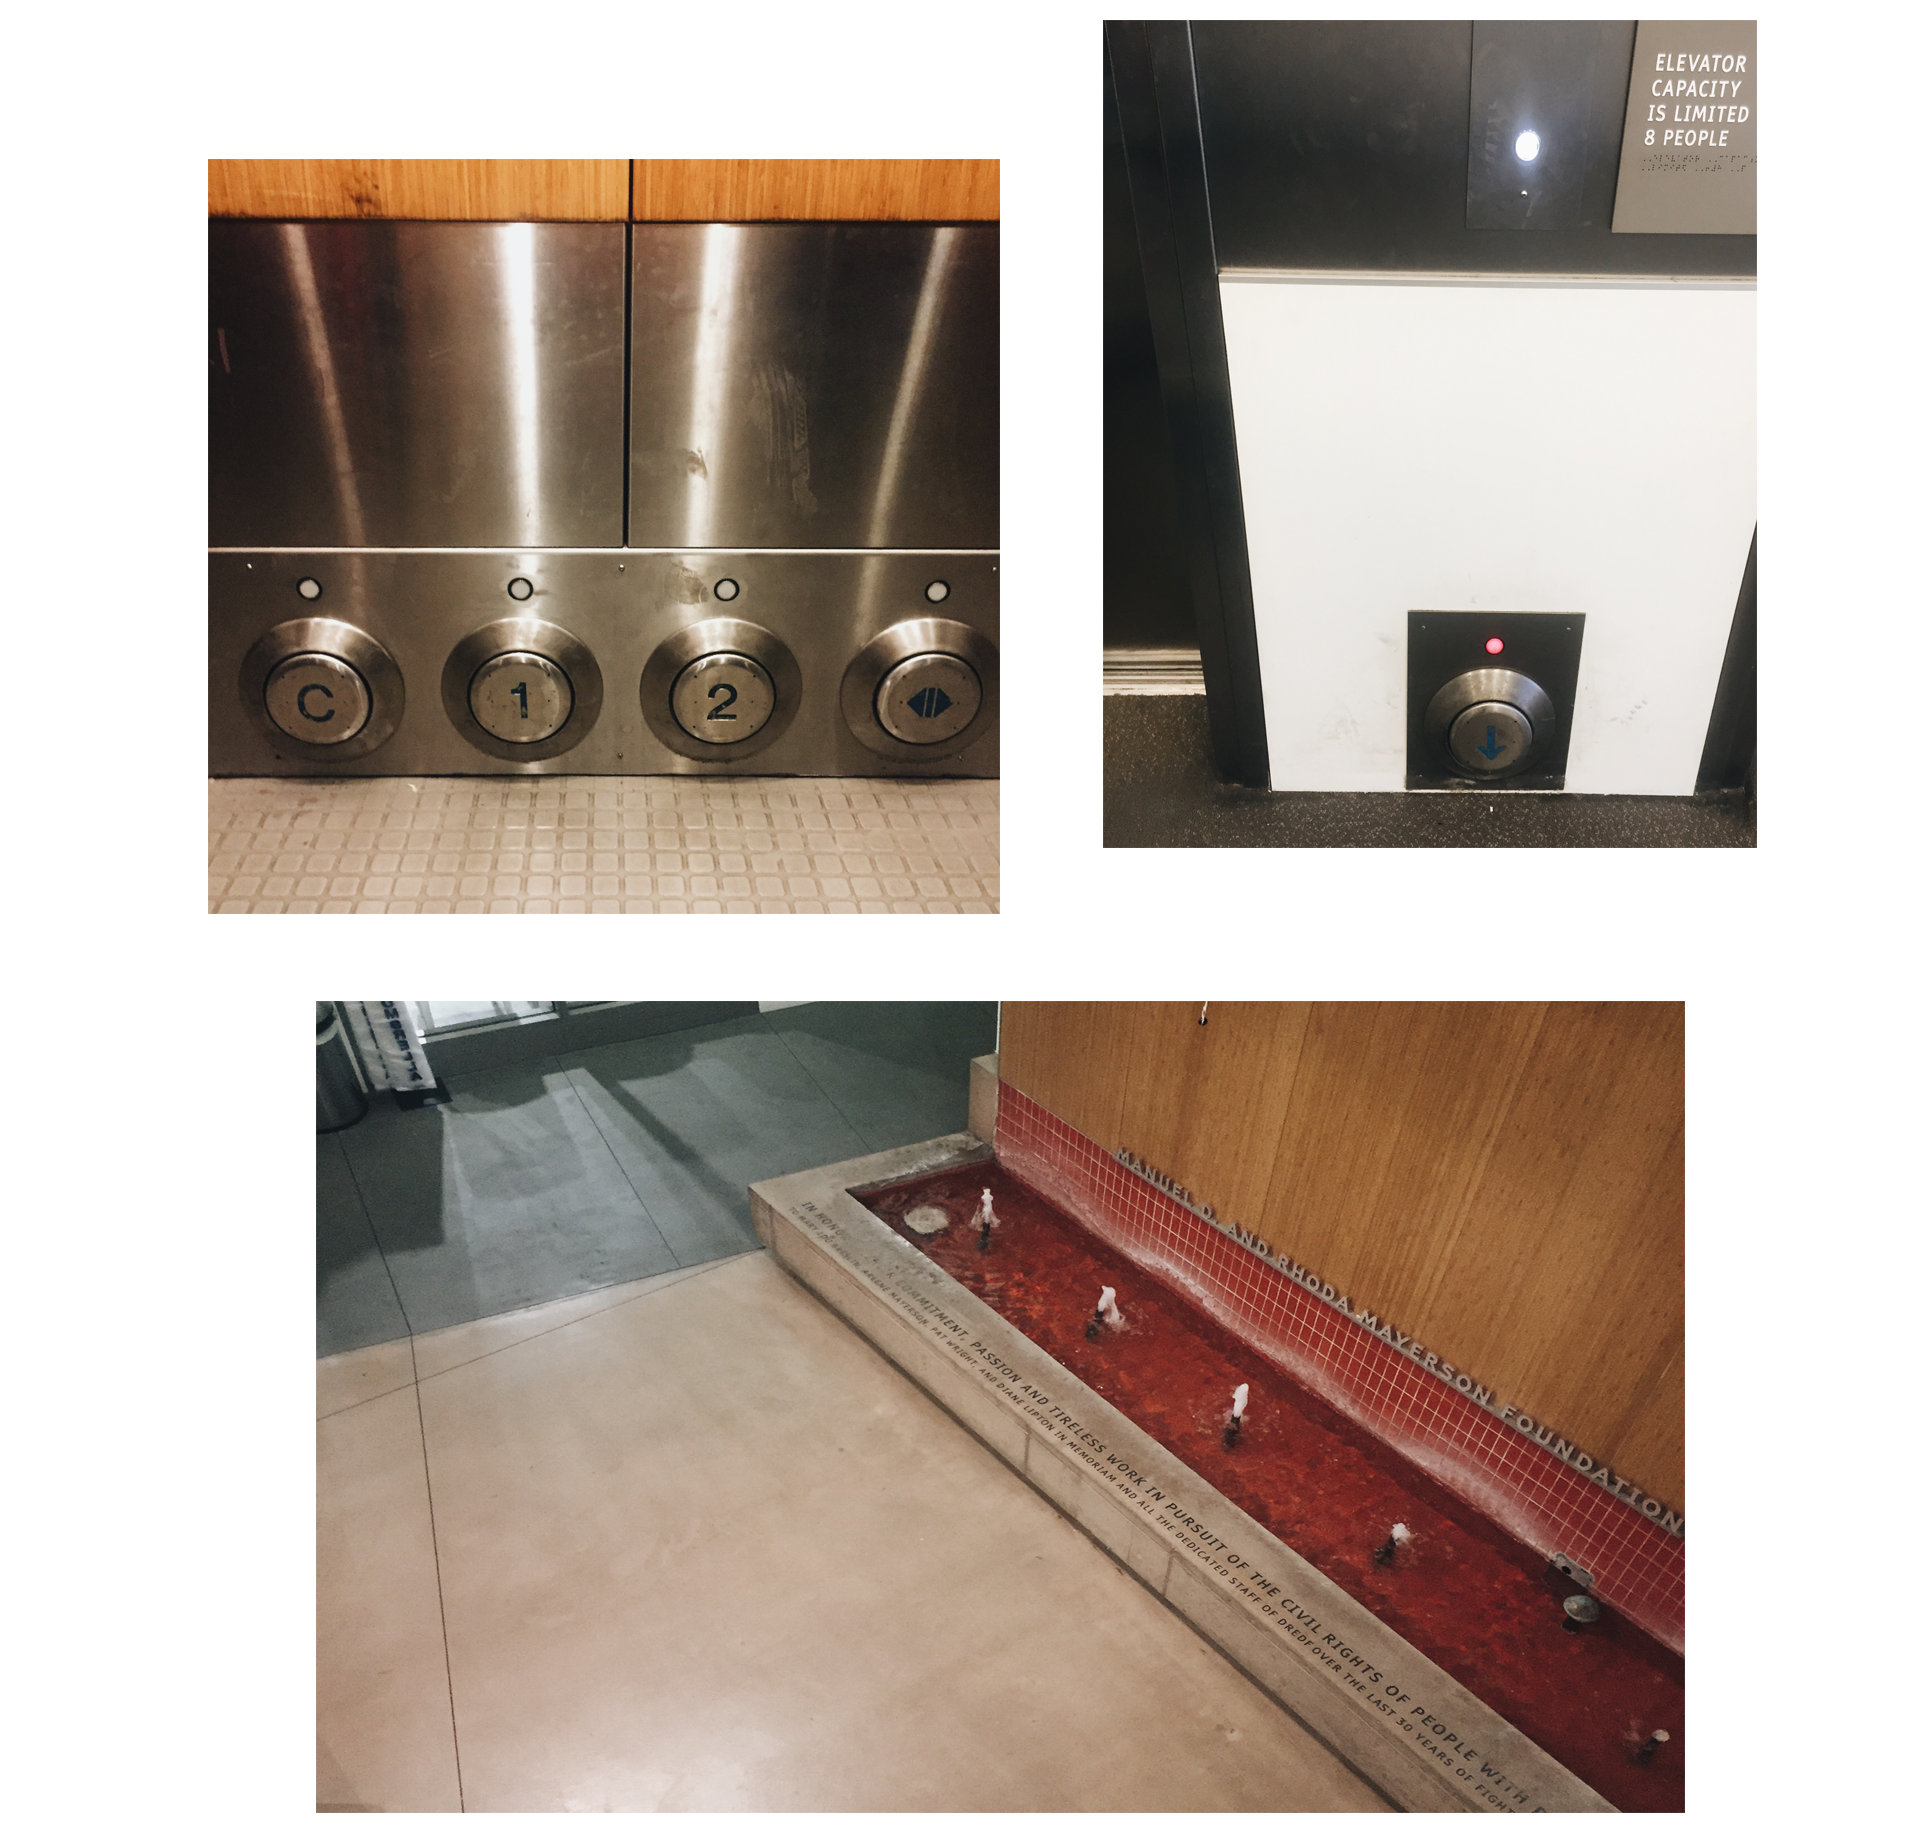 Here are some of the many examples of universal design at the Ed Roberts Campus. In addition to having elevators that can fit more than one wheelchair, the elevators are equipped with buttons close to the floor, so that people with wheelchairs can push the buttons with their wheelchair’s footplate. The fountain above serves as an audible landmark to help people with blindness feel the end of the room